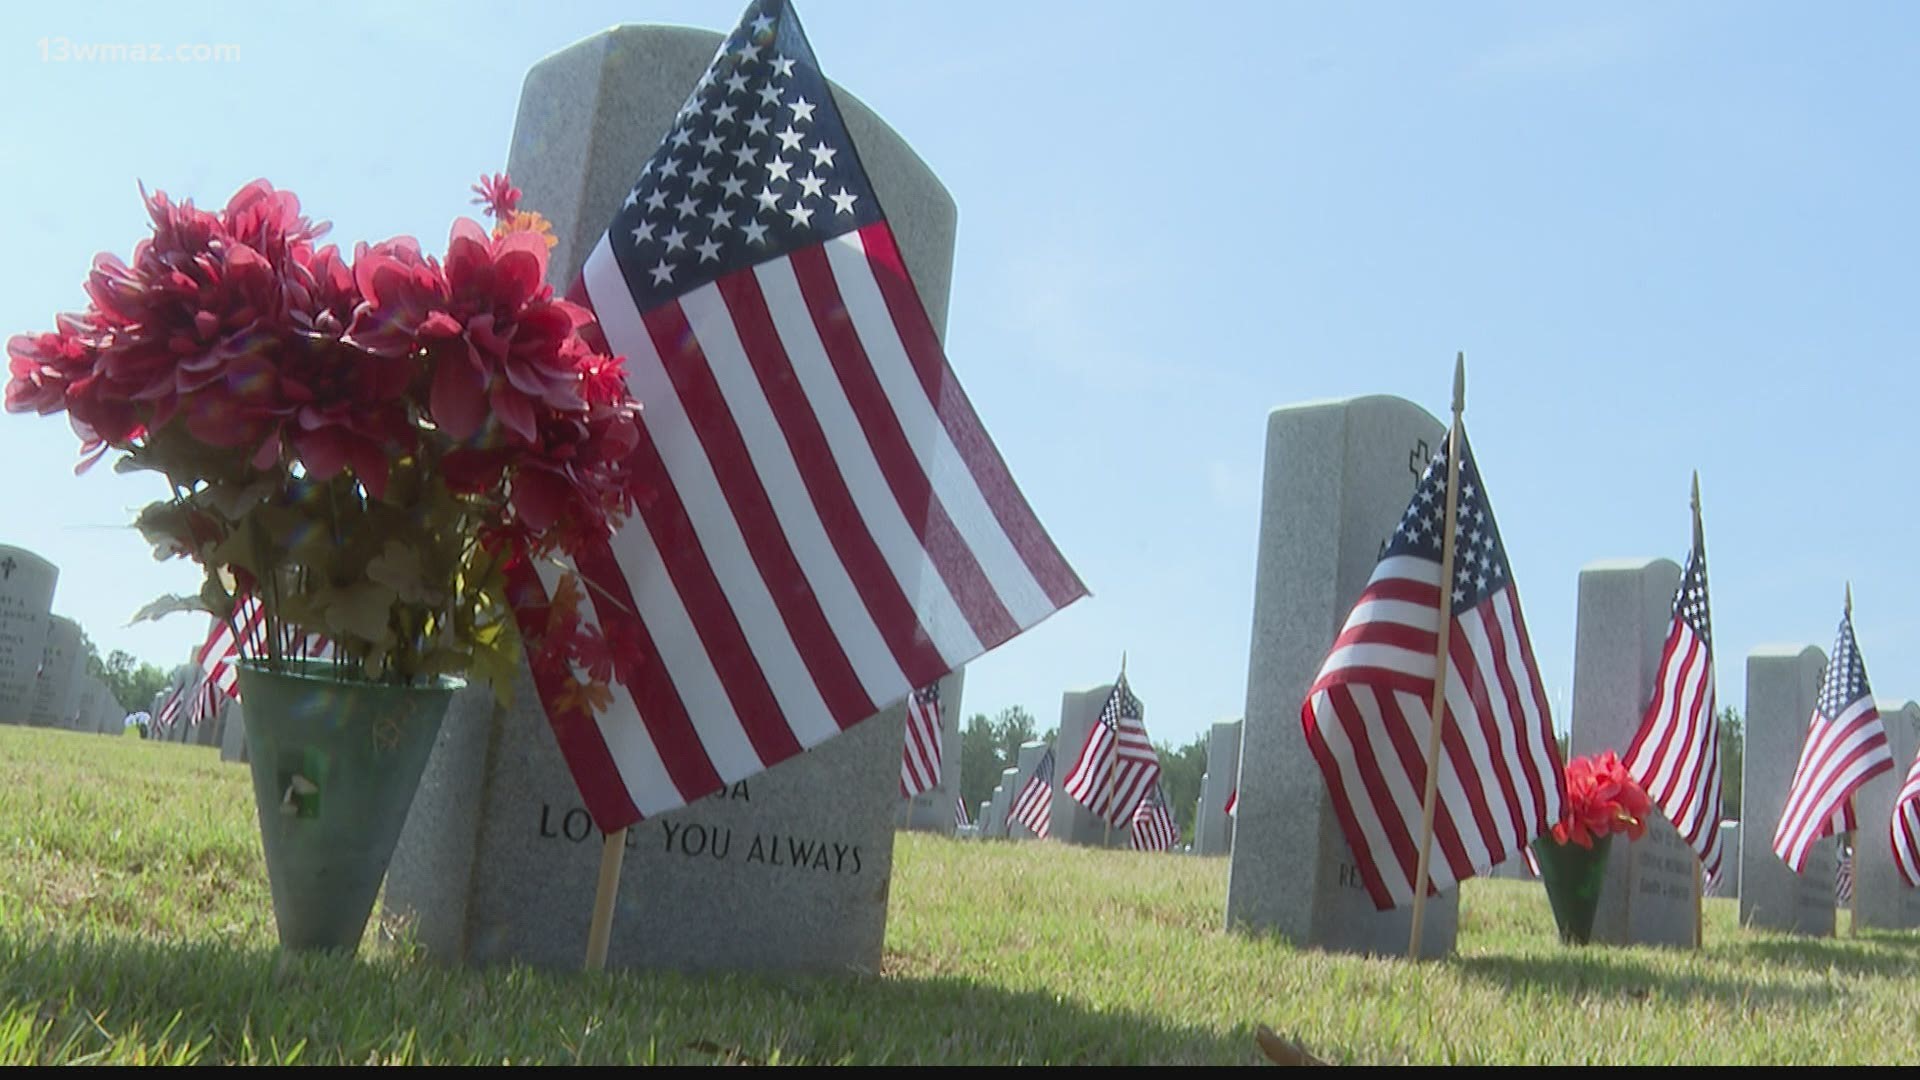 Memorial Day remembrance events in some communities are being cancelled this year, because of COVID-19.